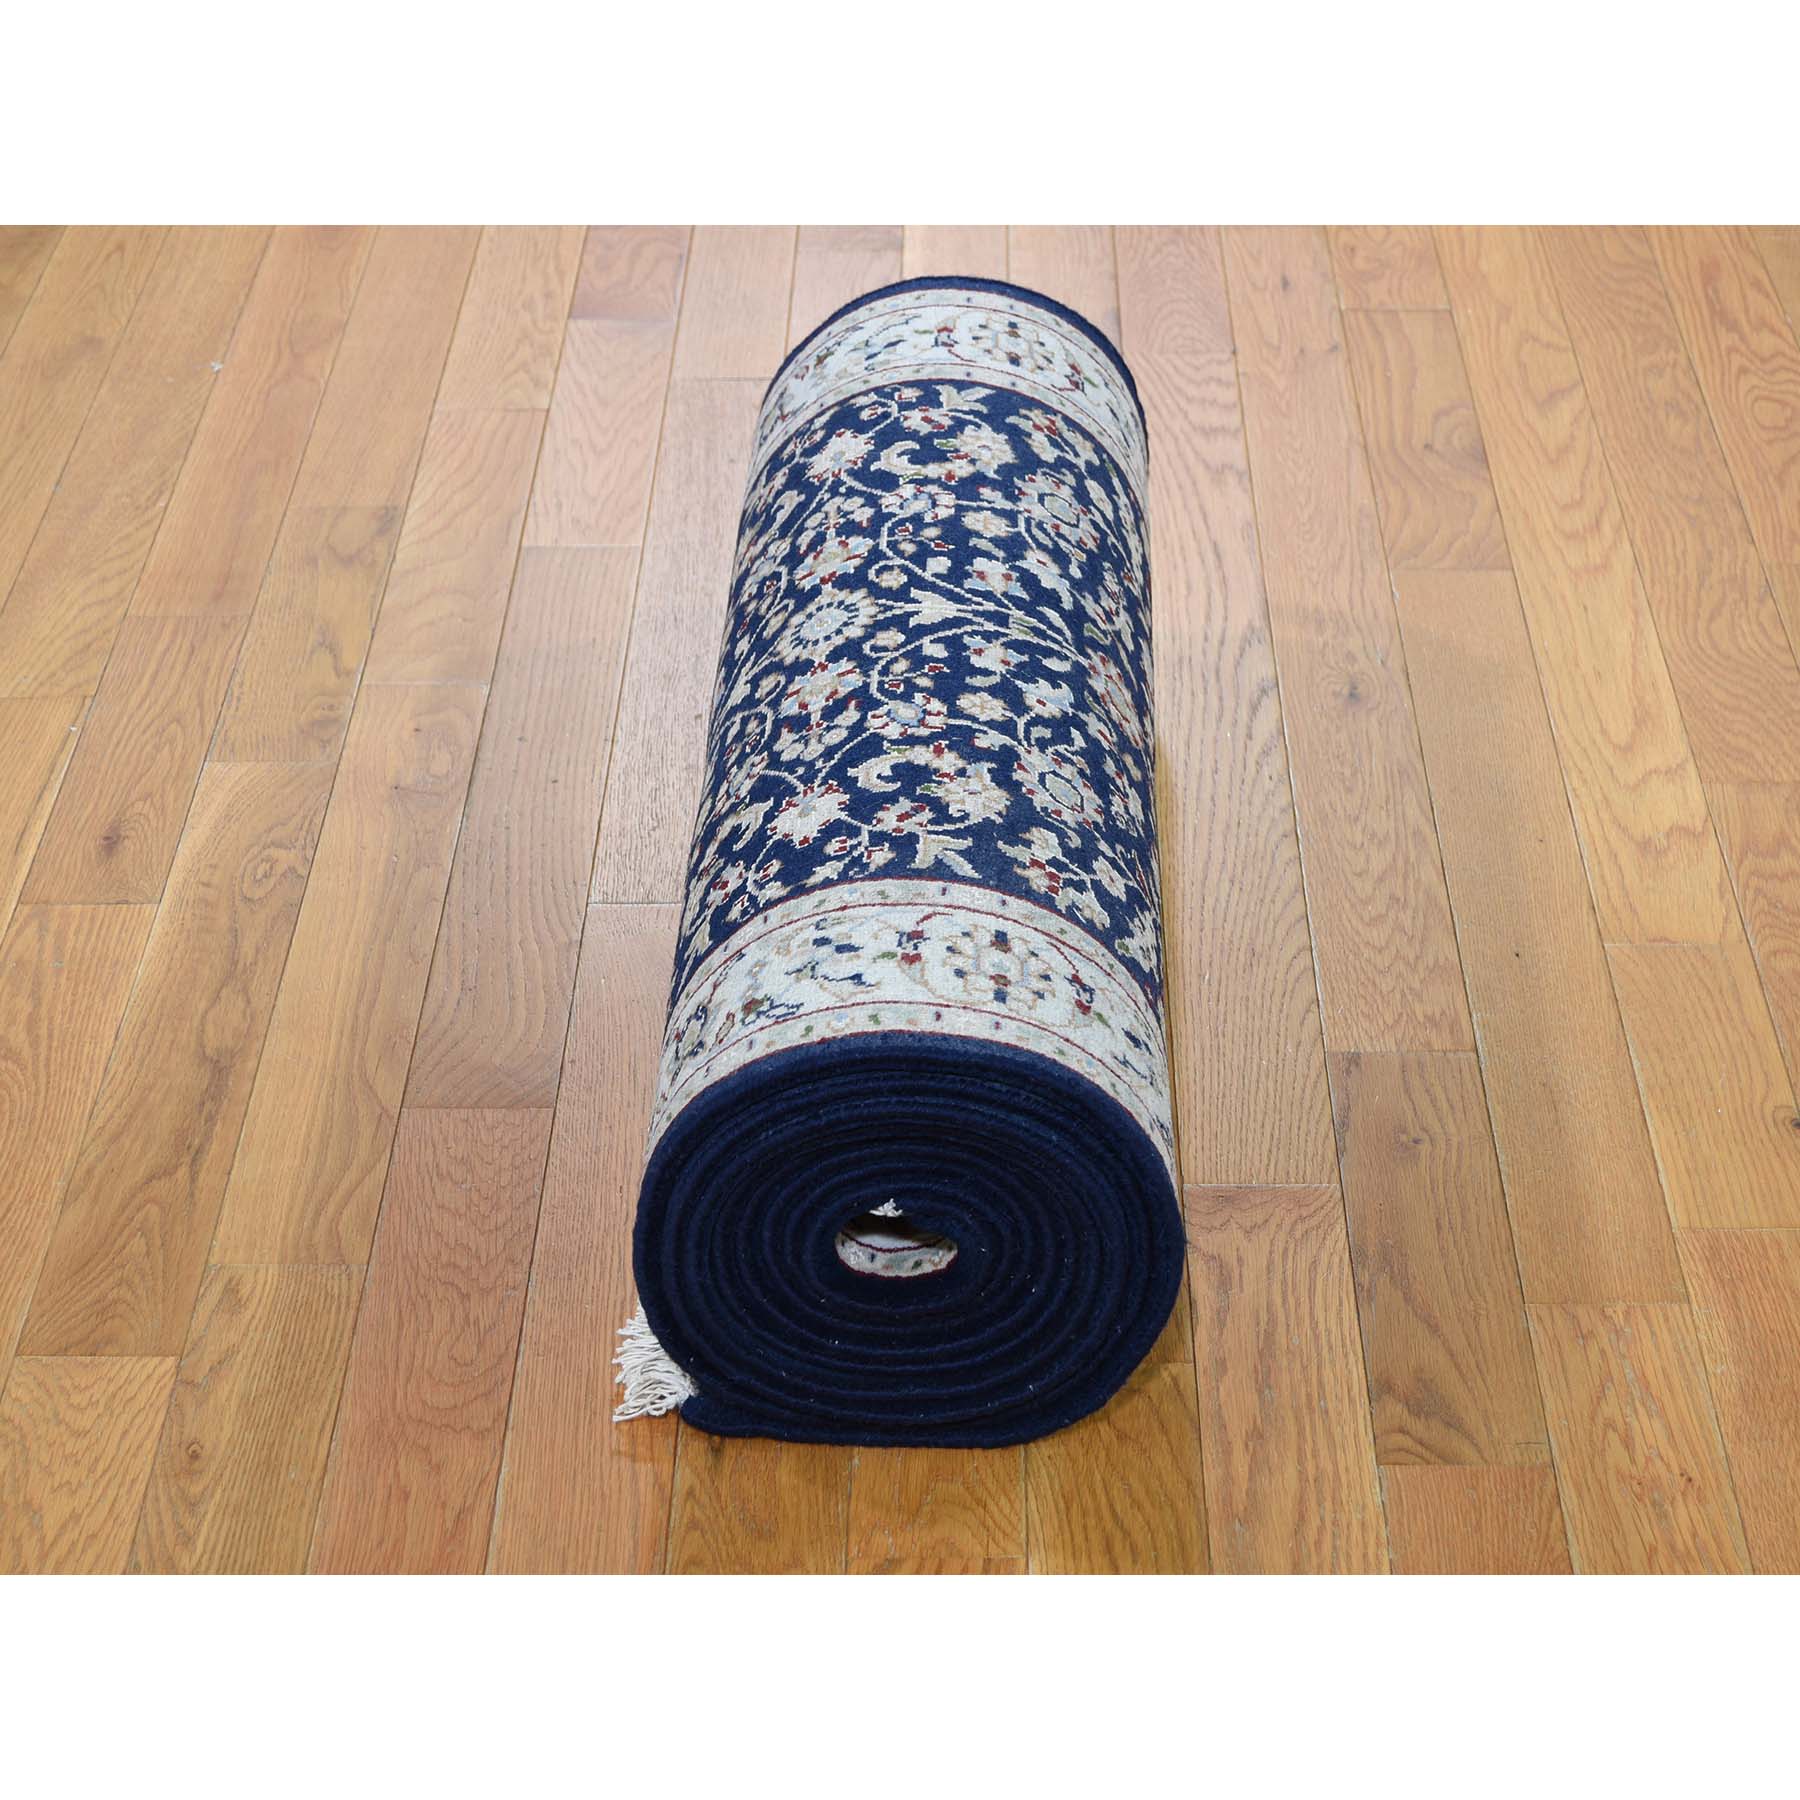 2-7 x14- Wool And Silk 250 Kpsi Navy Blue All Over Design Nain XL Runner Hand-Knotted Oriental Rug 